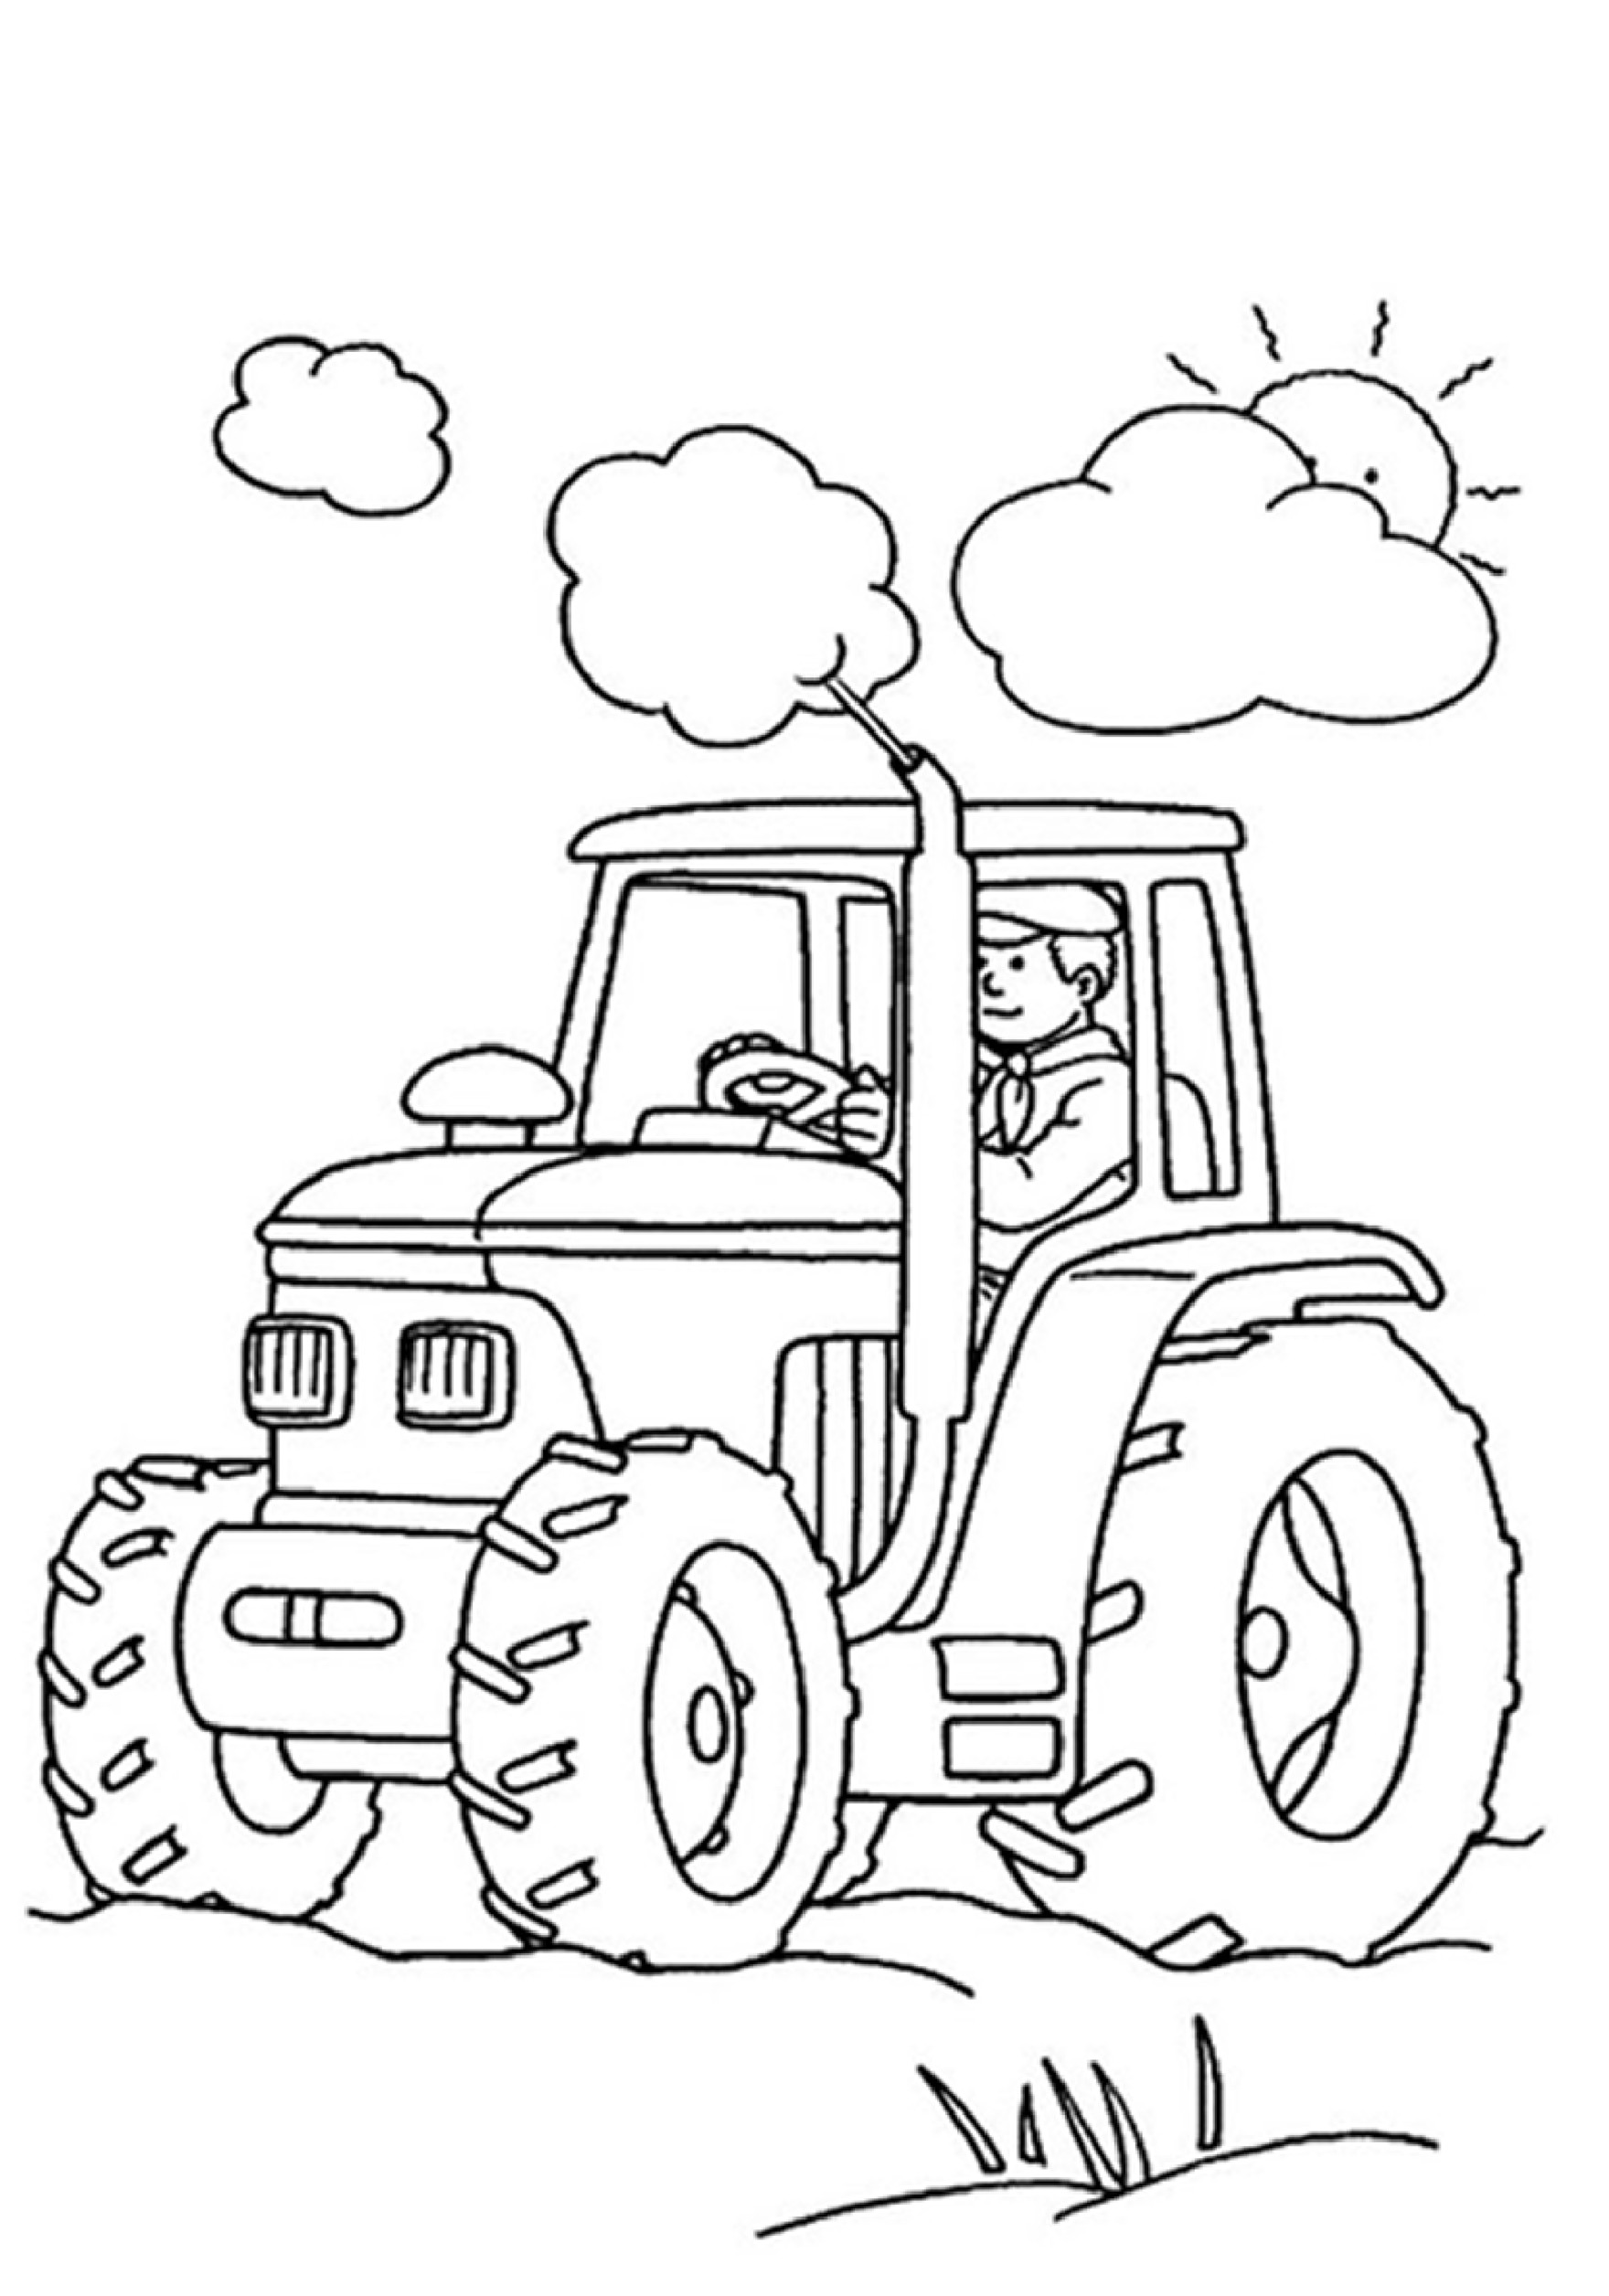 Printable Coloring Pages For Boys Pdf
 Boy Coloring Pages Pdf Coloring Home